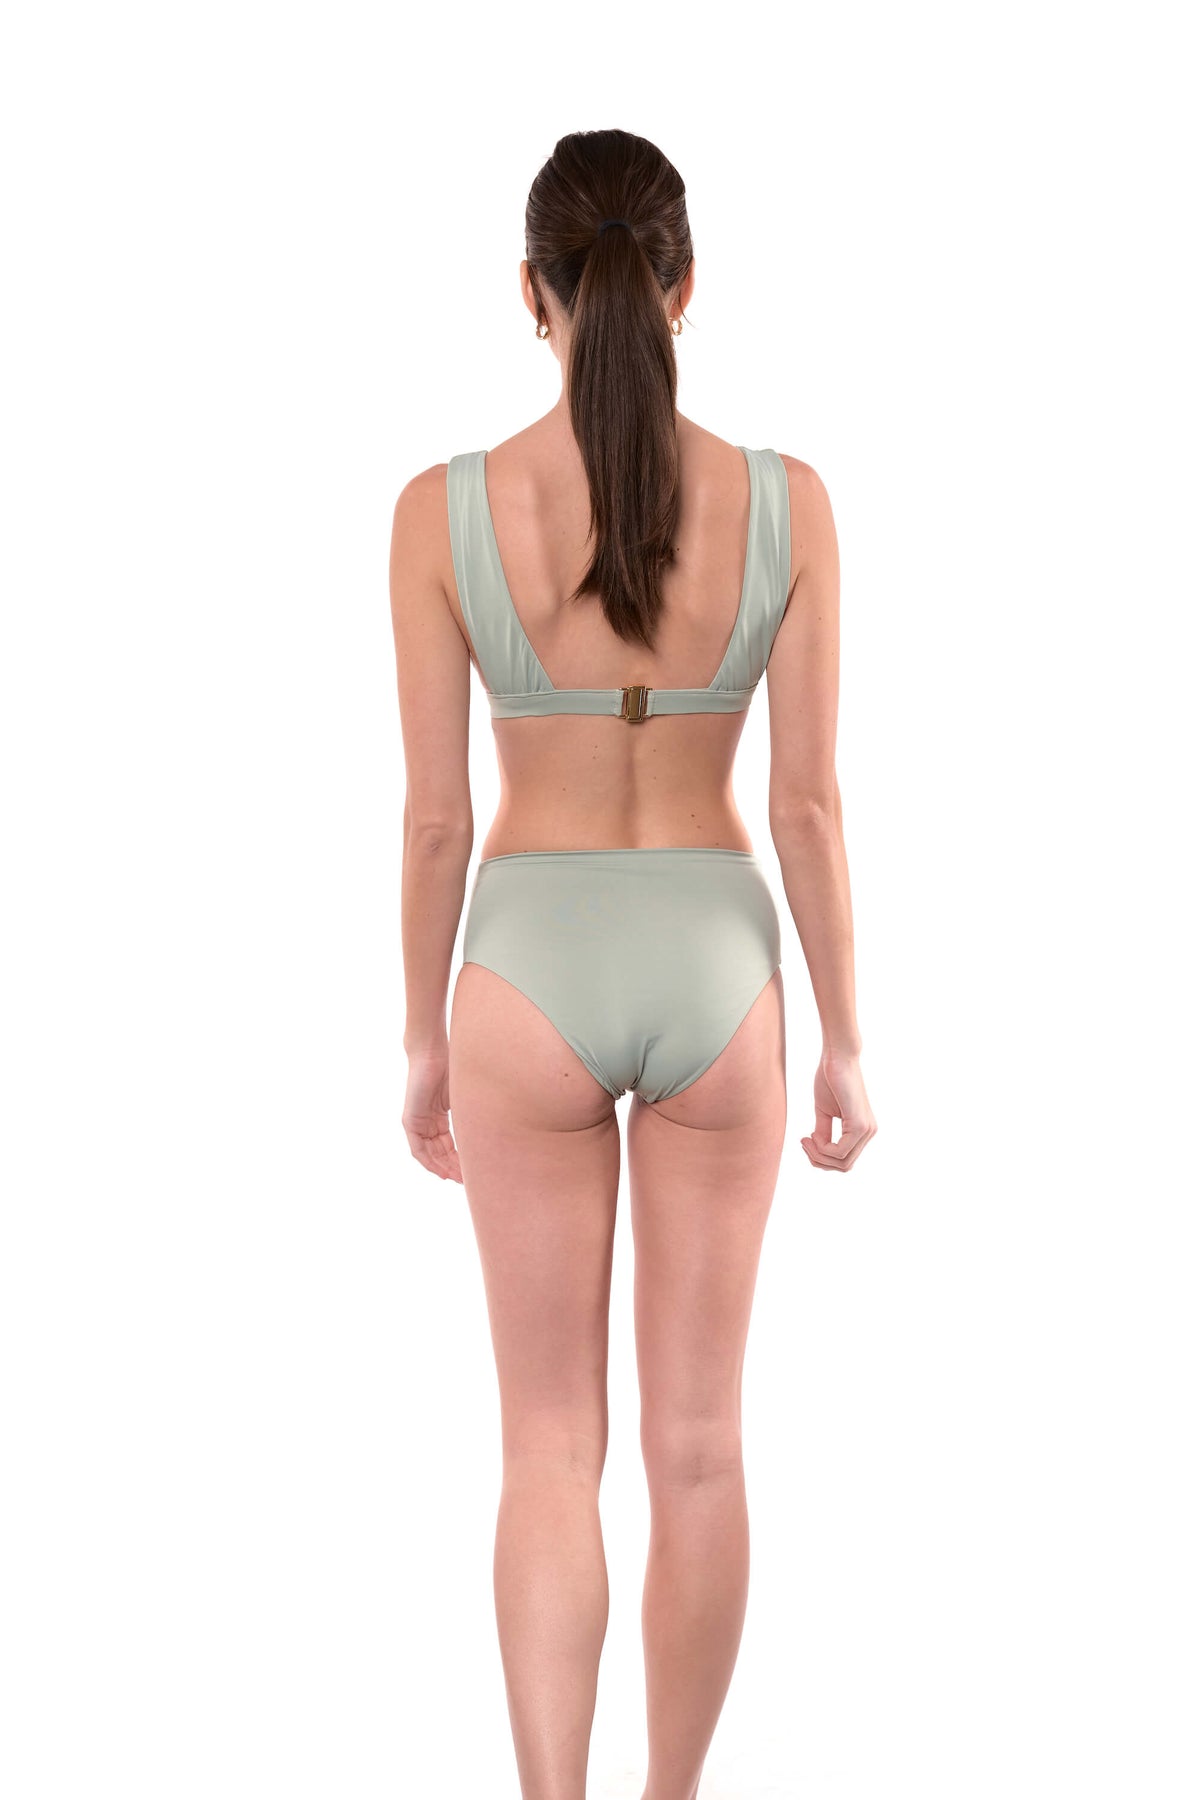 Model shows the back of the Natalie bikini top in sage green